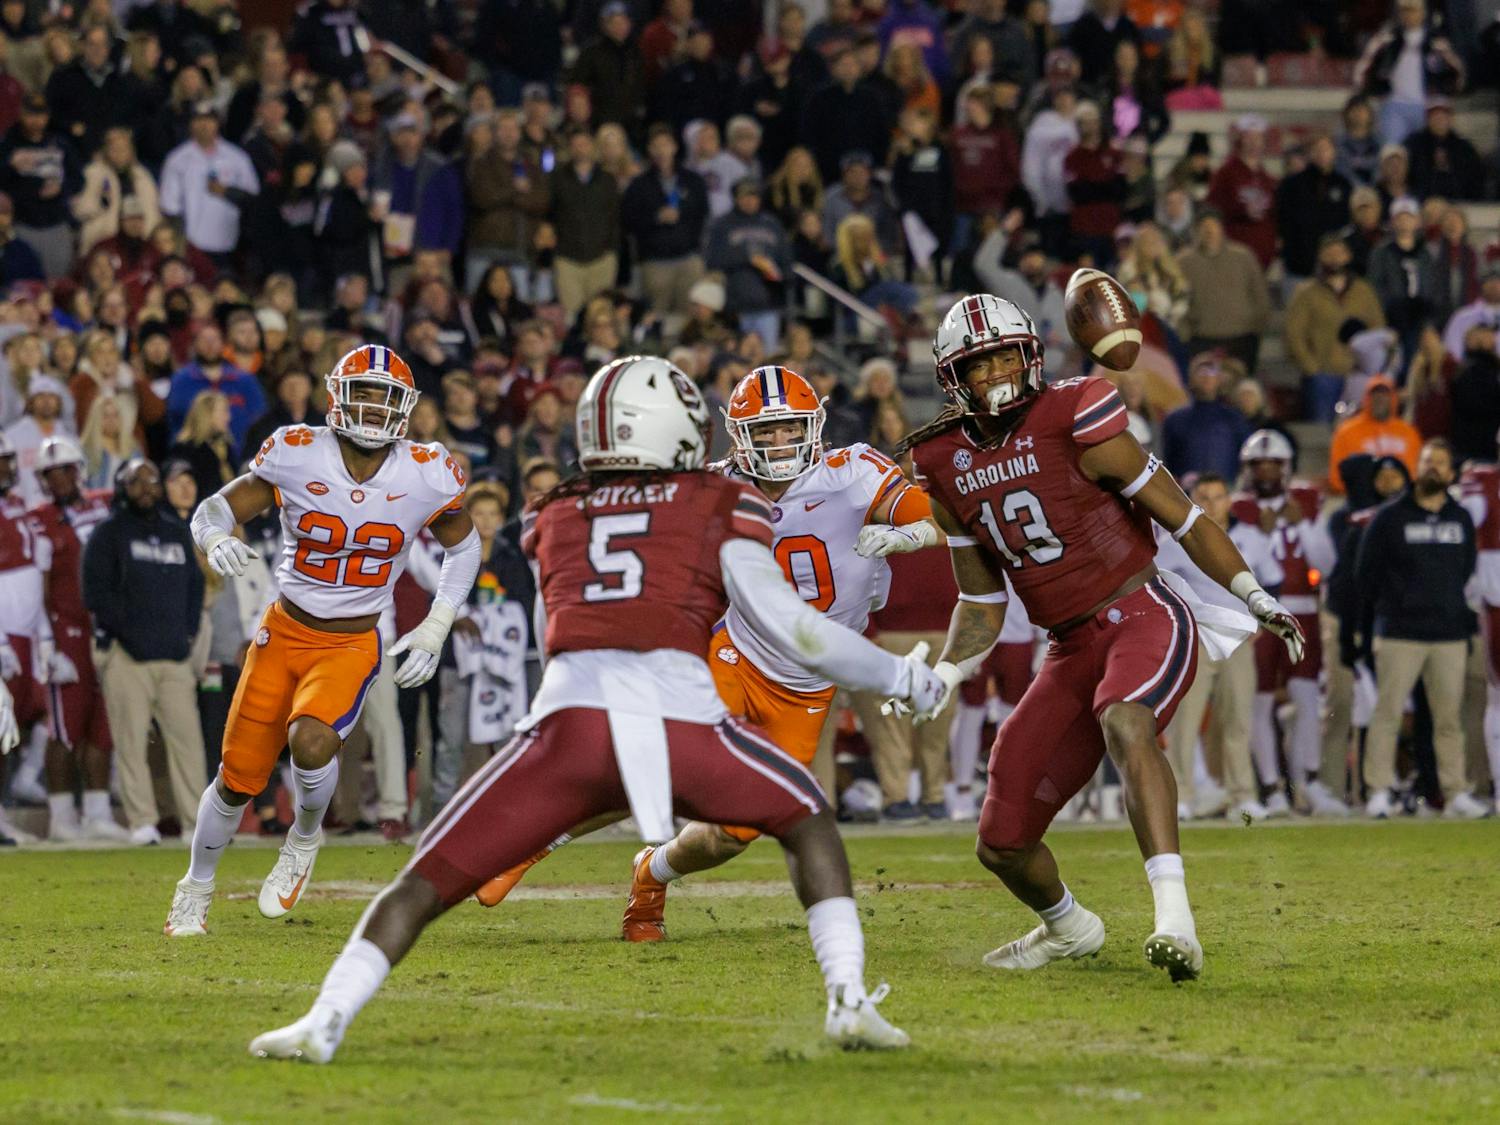 South Carolina Gamecocks wide receiver E.J. Jenkins goes in to catch the ball against the Clemson Tigers on Nov. 28, 2021. Clemson won 30-0.&nbsp;